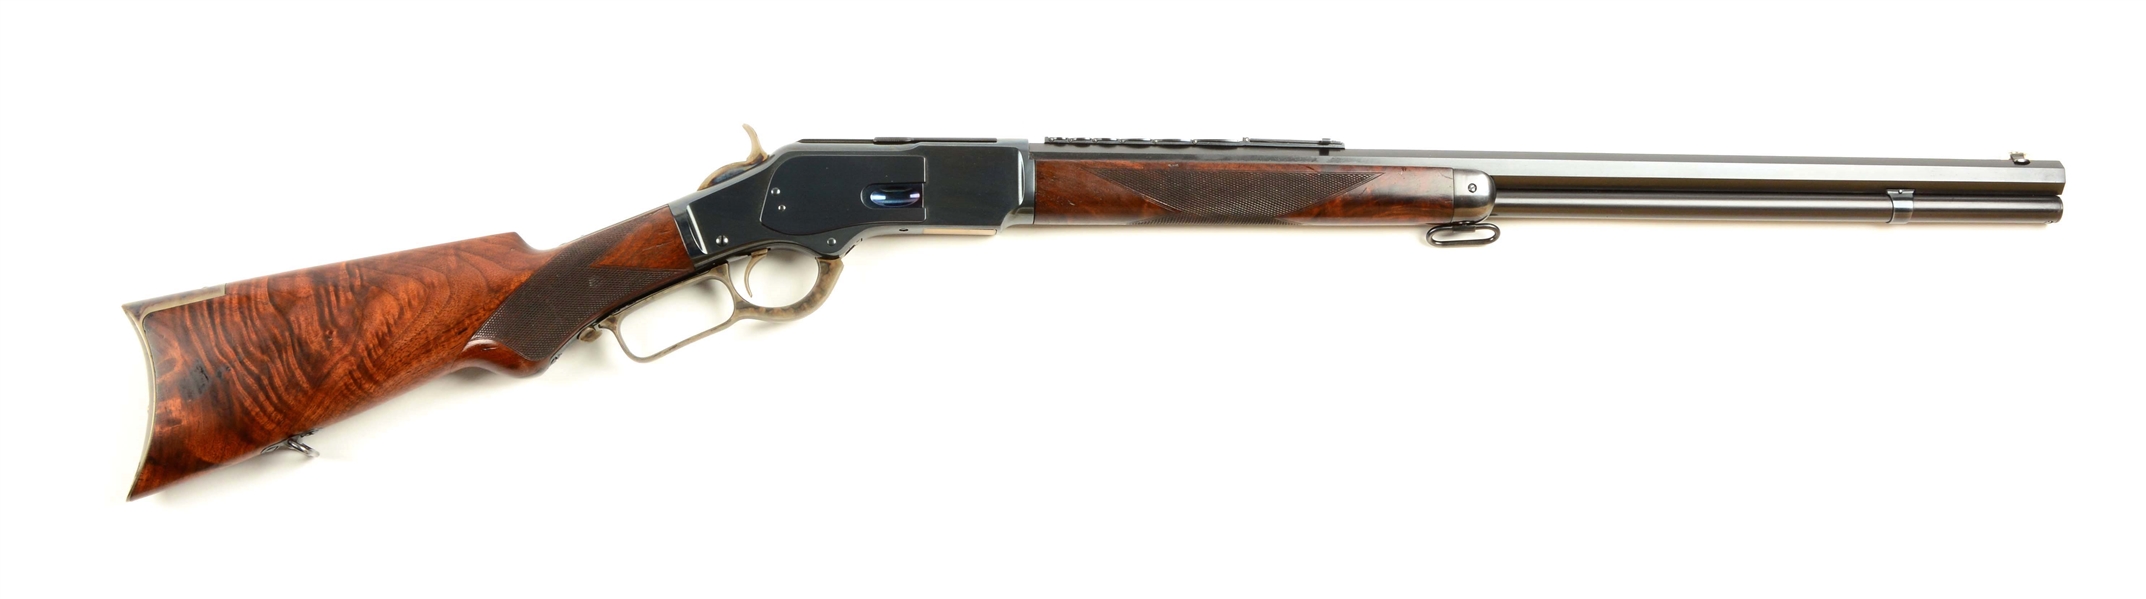 (A) WINCHESTER 1873 DELUXE LEVER ACTION RIFLE WITH SEVEN LEAF REAR SIGHT.